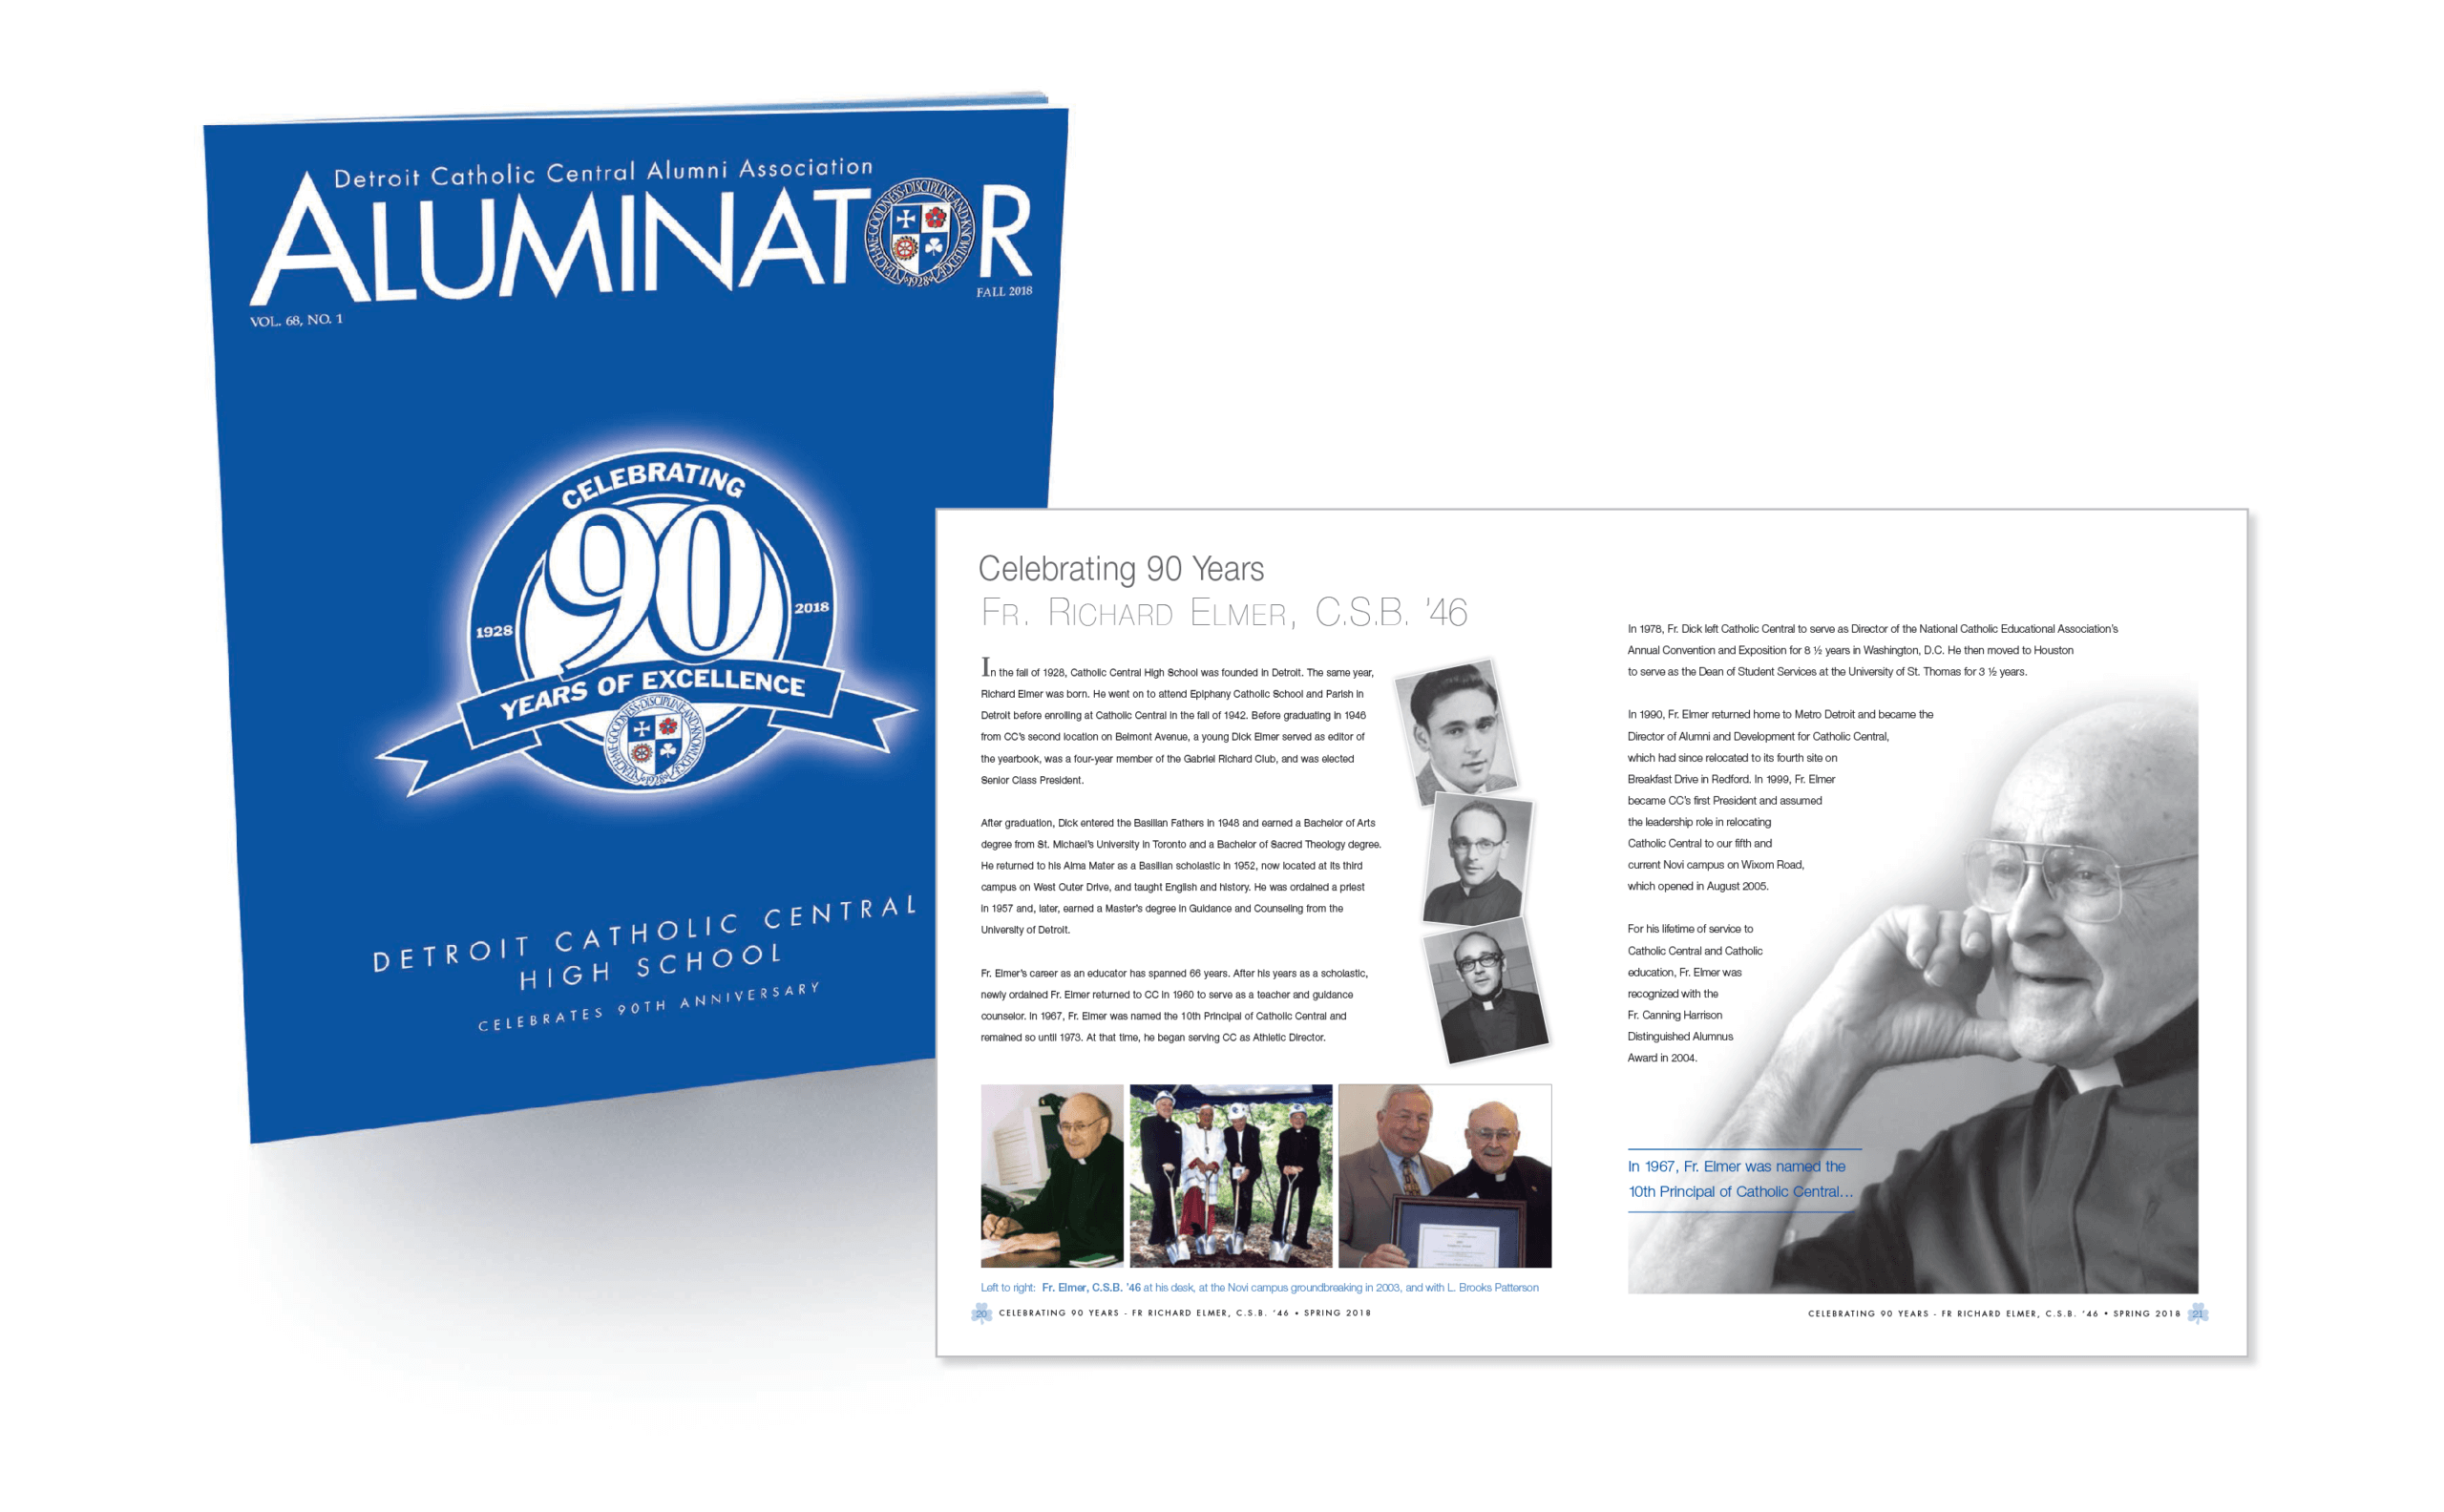 Aluminator magazine fundraiser event invitation issue with 90th logo and Fr. Elmer, CSB '46 on the cover